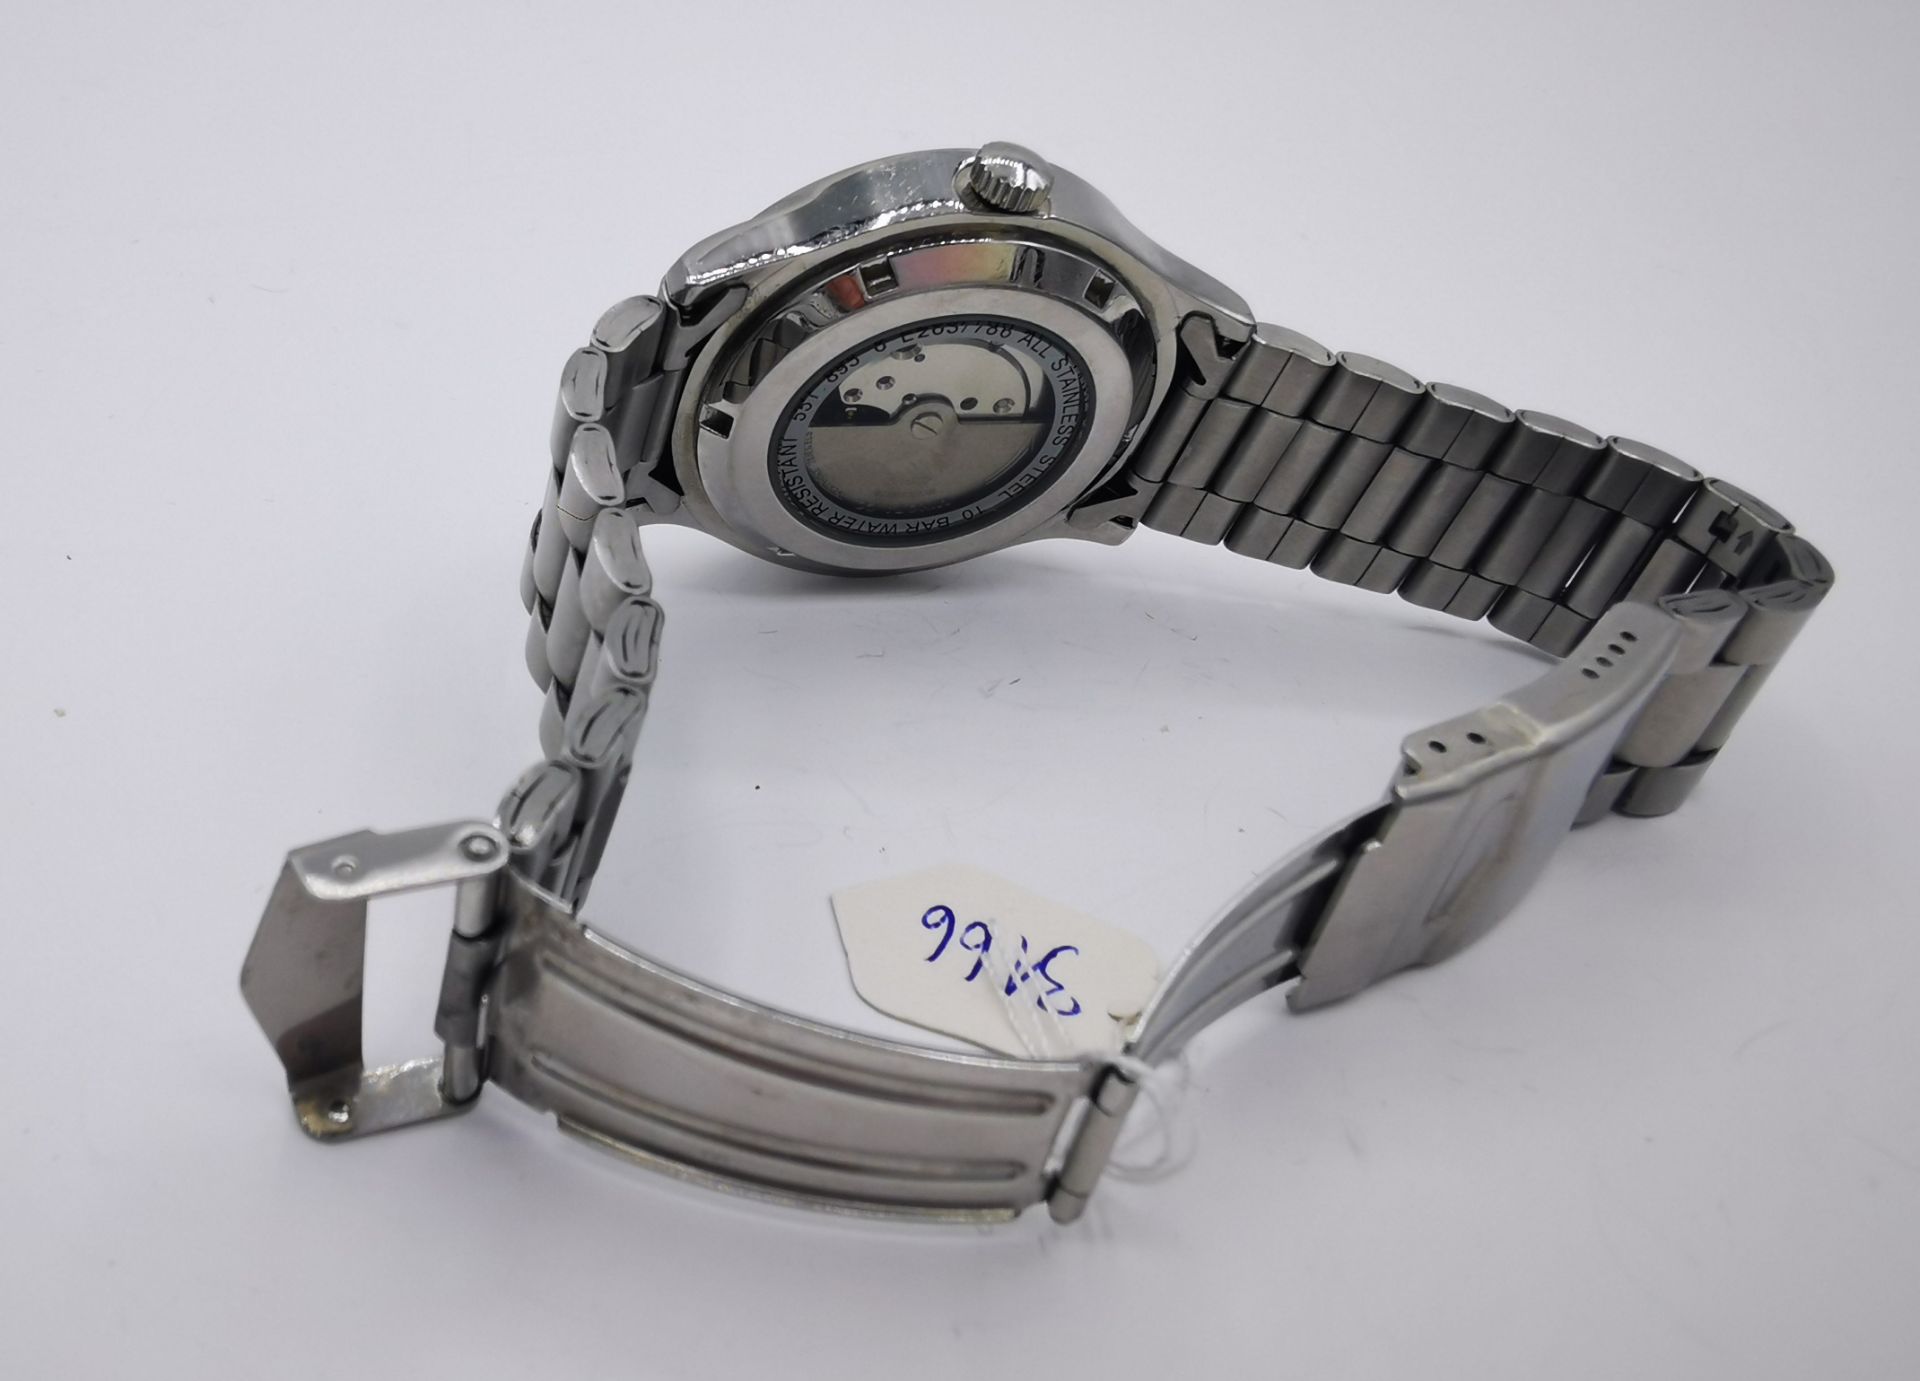 MEISTER ANKER WRISTWATCH - Image 4 of 4